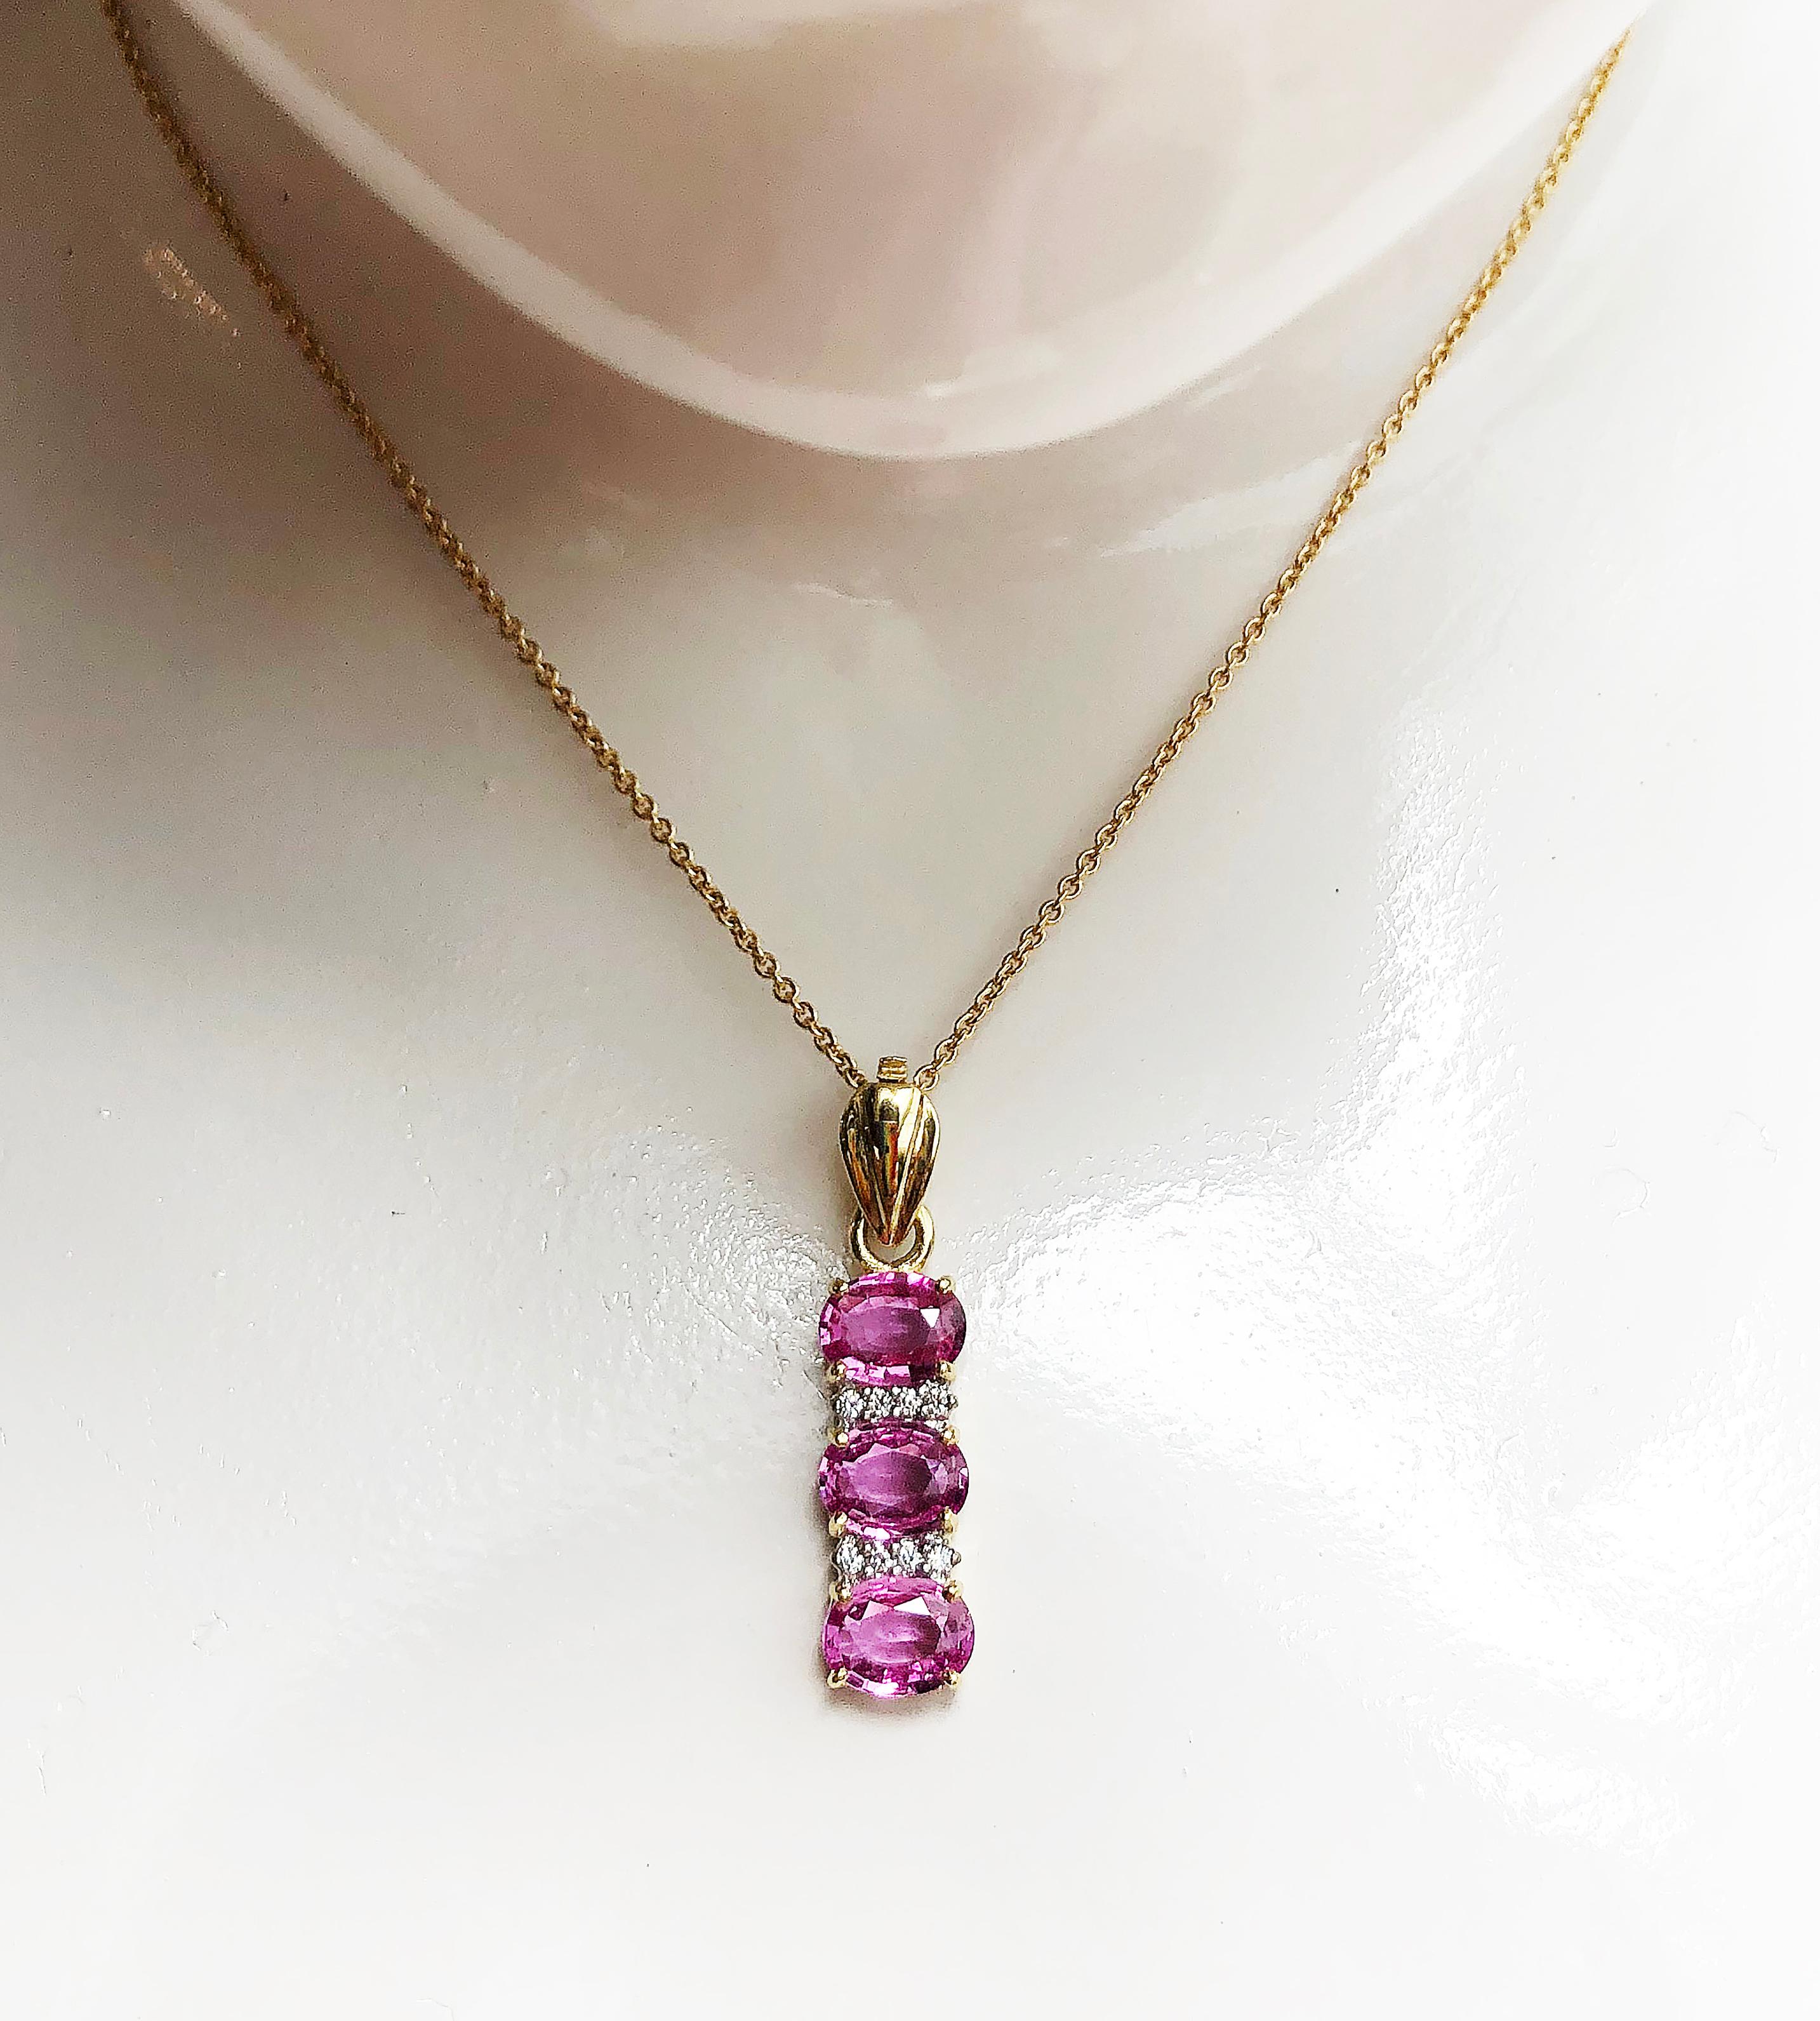 Pink Sapphire 3.45 carats with Diamond 0.09 carat Pendant set in 18 Karat Gold Settings
(chain not included)

Width: 0.8 cm
Length: 3.2 cm 

